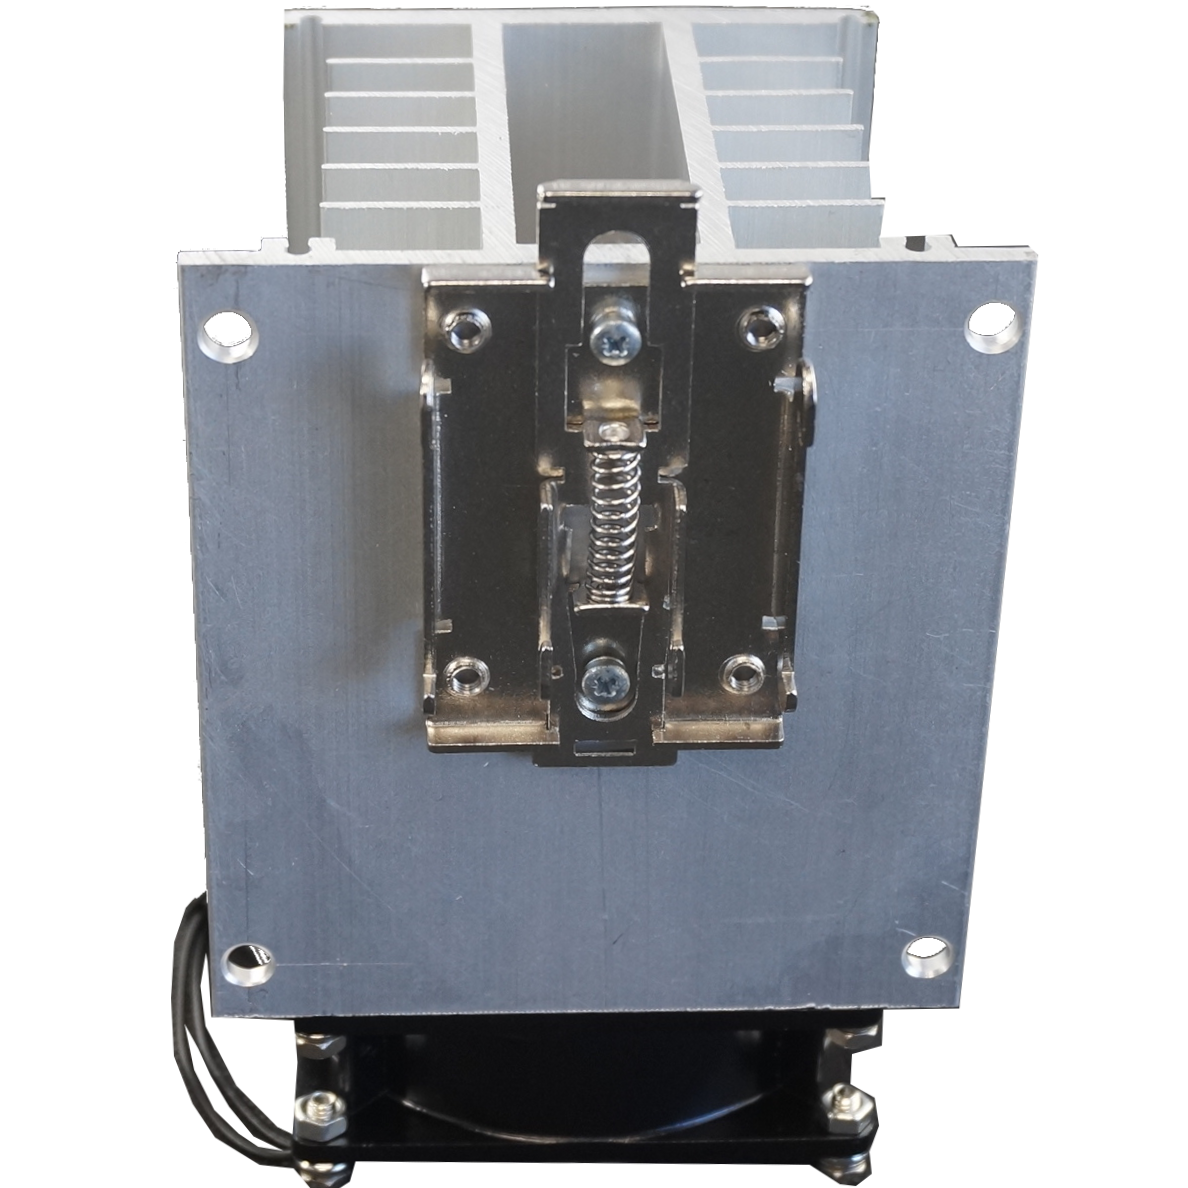 FTH6053ZA4 + HS212DR-F, Solid State Relay, and Heatsink Assembly, 3 Phase 90-280VAC Control, 36 Amp per phase @ 40 Deg C, 48-530VAC Load, LED Status Indicator, with IP20 Cover